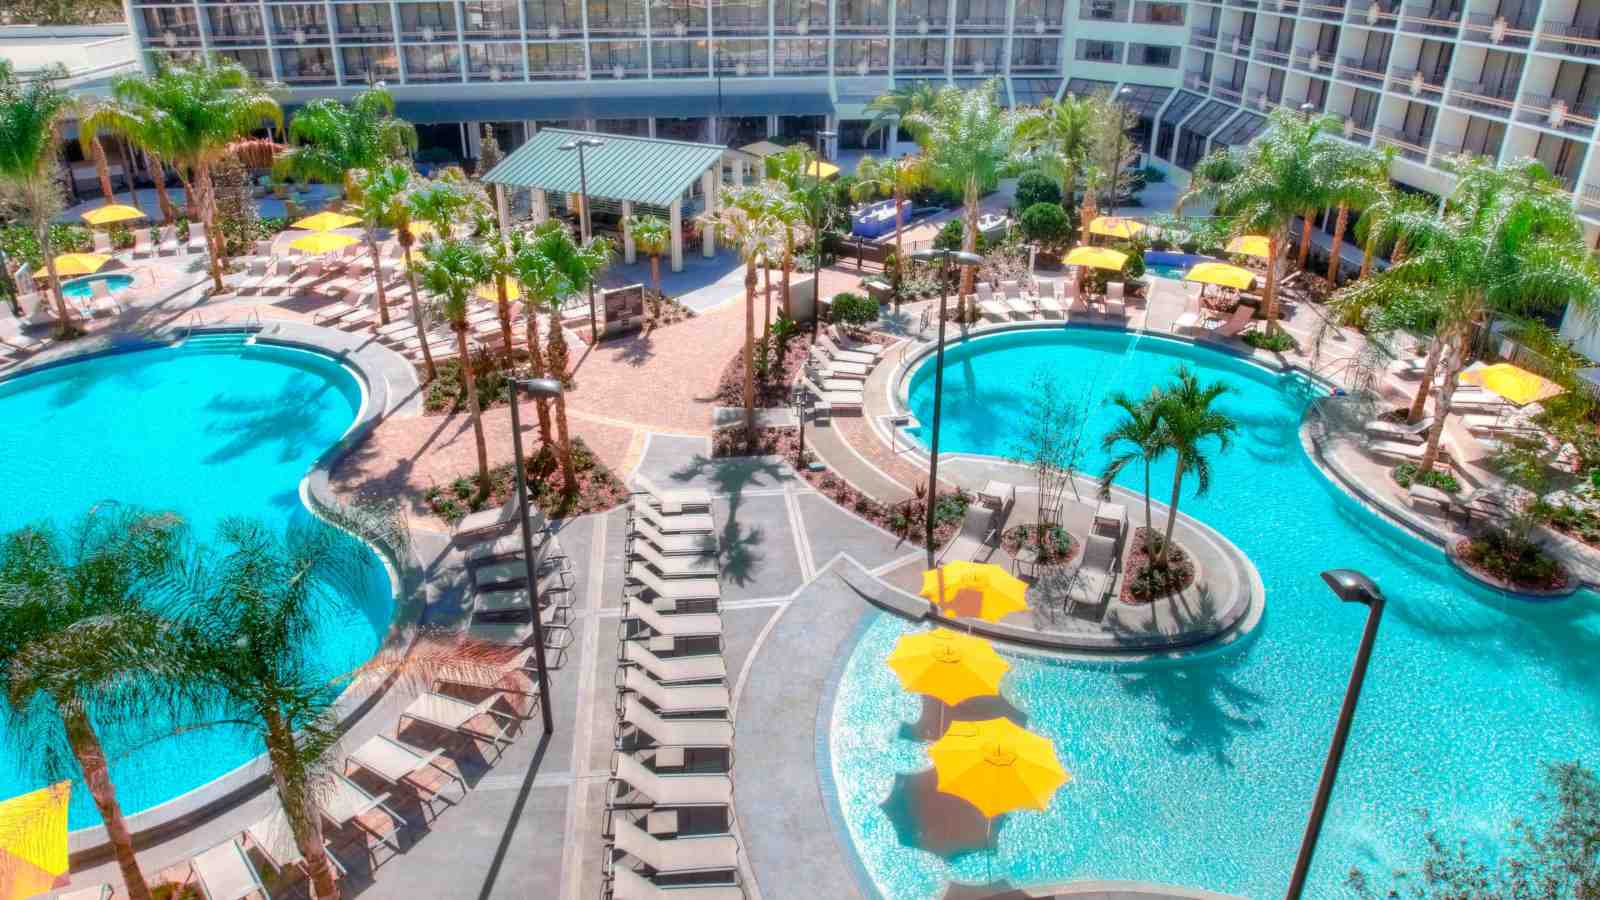 The Sheraton Orlando Lake Buena Vista Resort is the official resort of the Disney One Magical Weekend and even hosts gay parties during the event